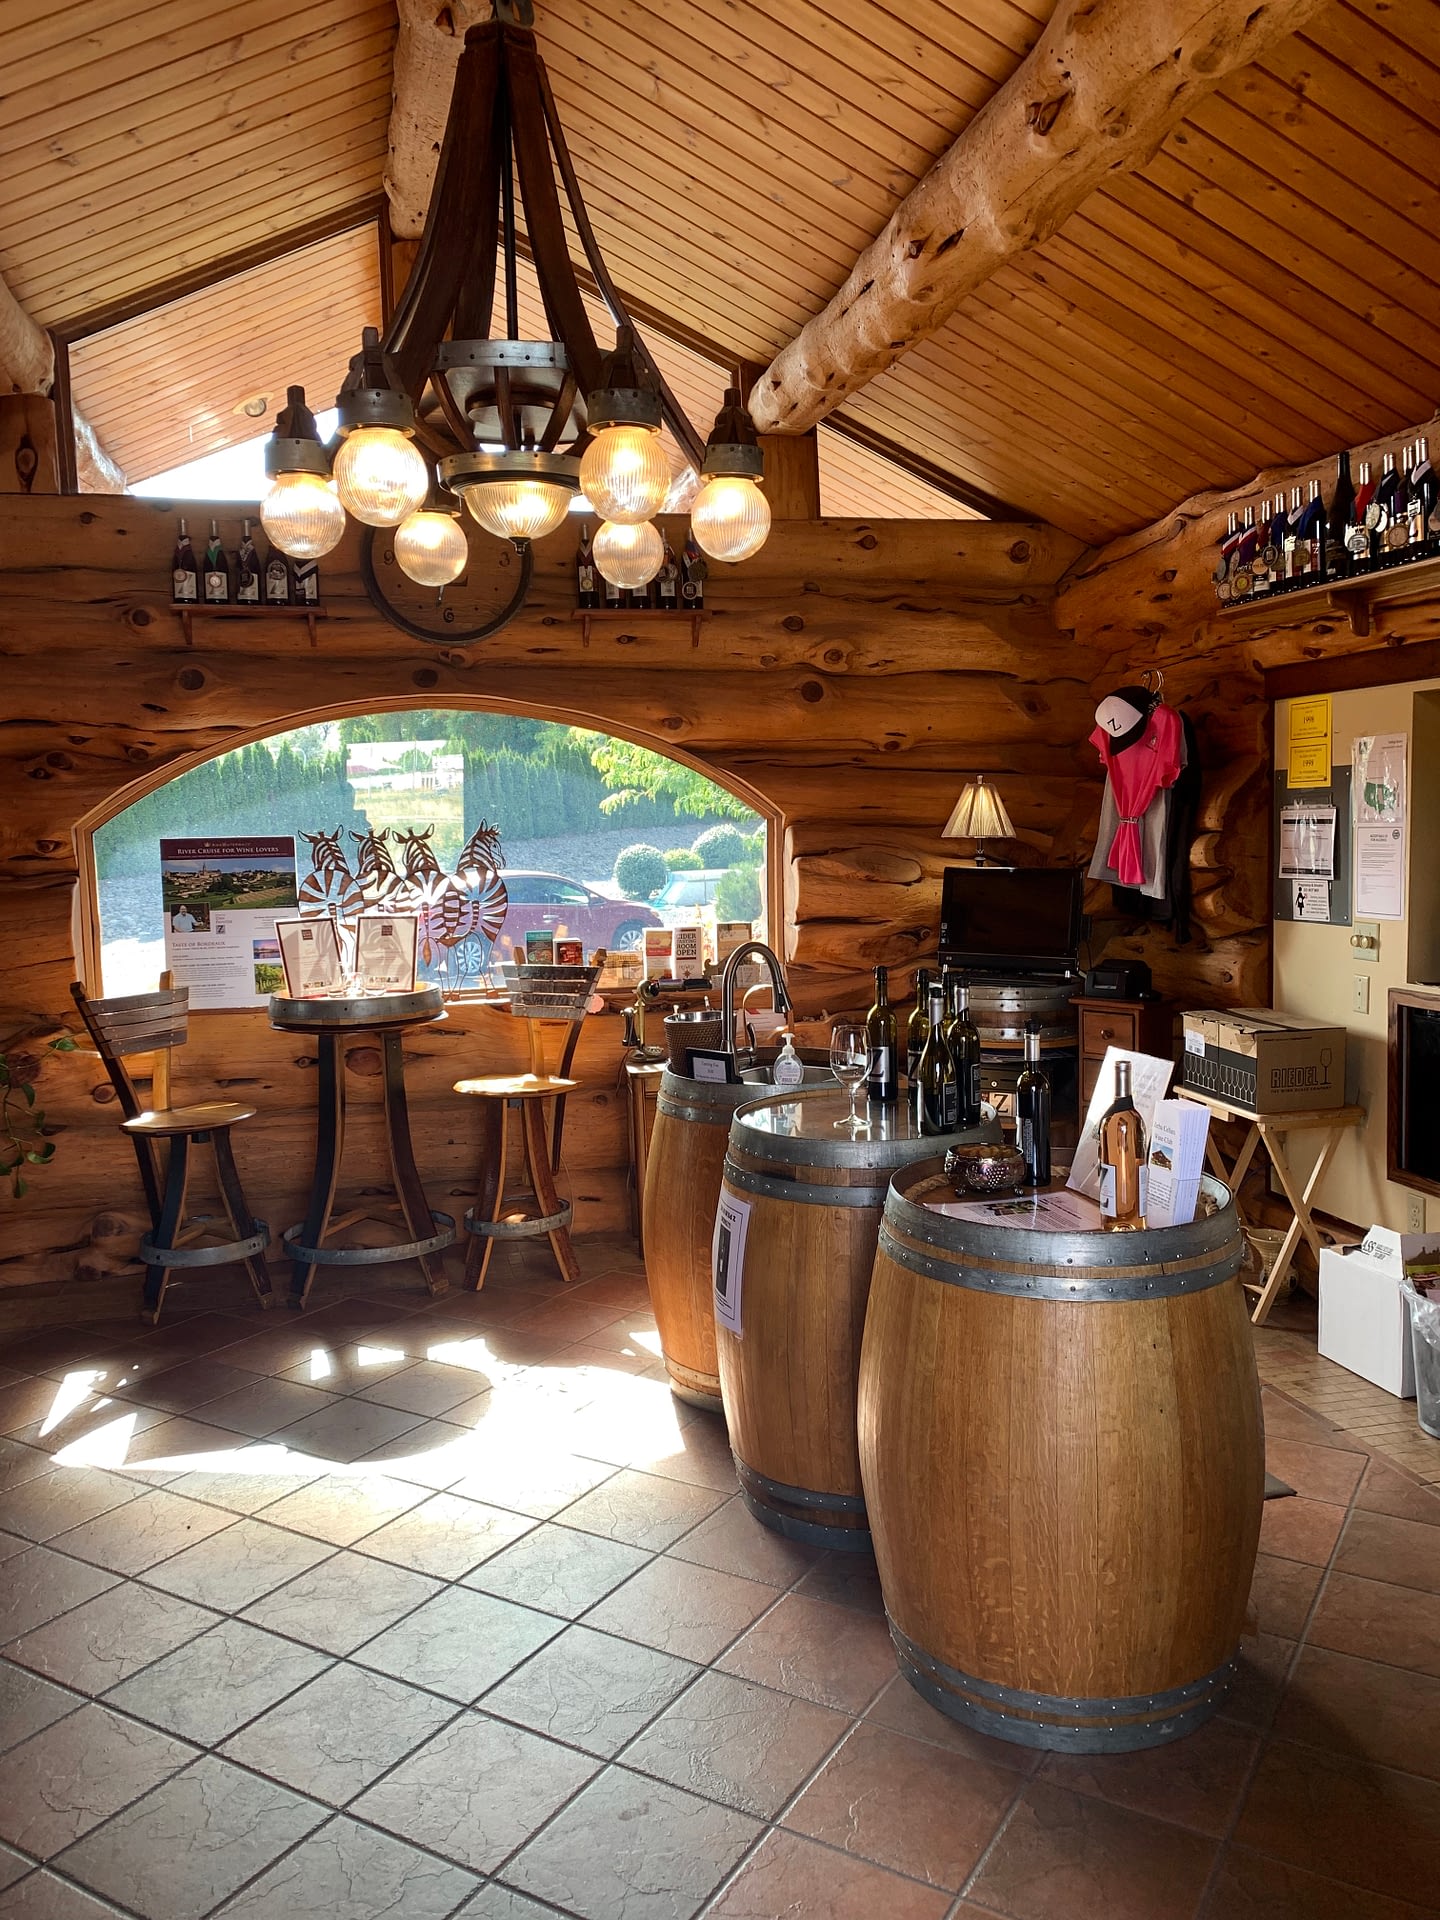 Gorgeous rustic interior with wine barrel tables of Zerba Cellars